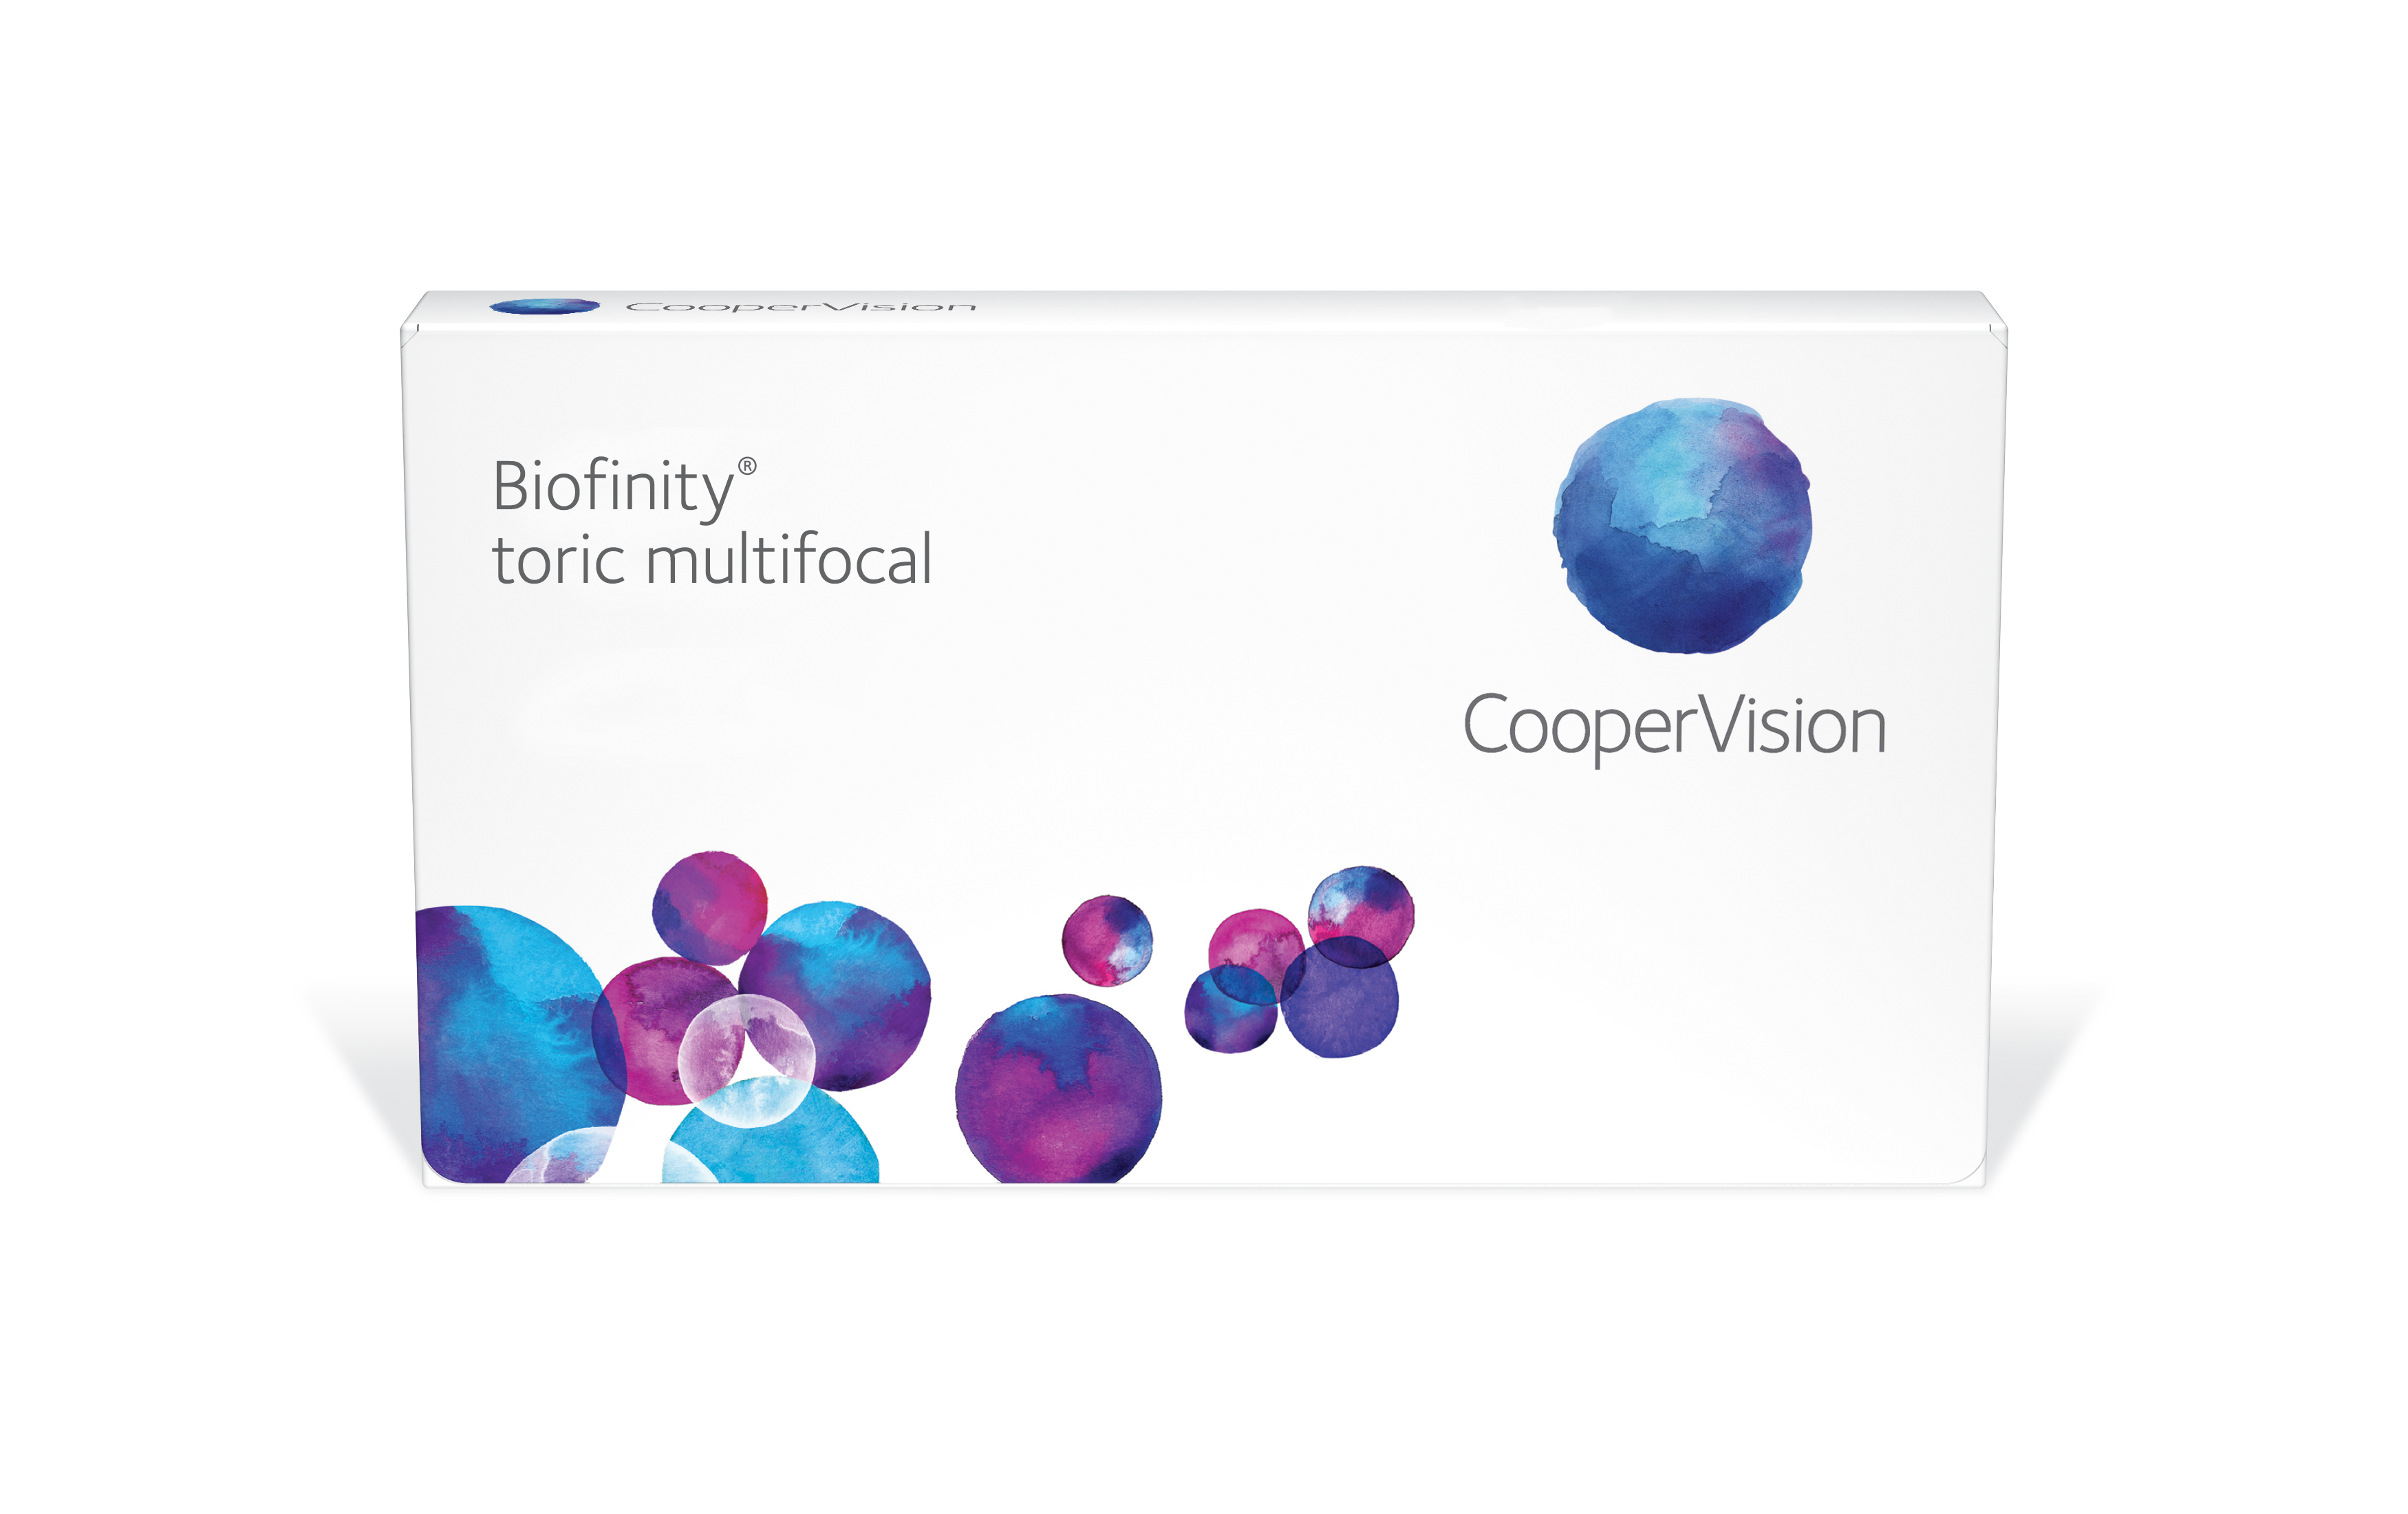 coopervision-biofinity-toric-multifocal